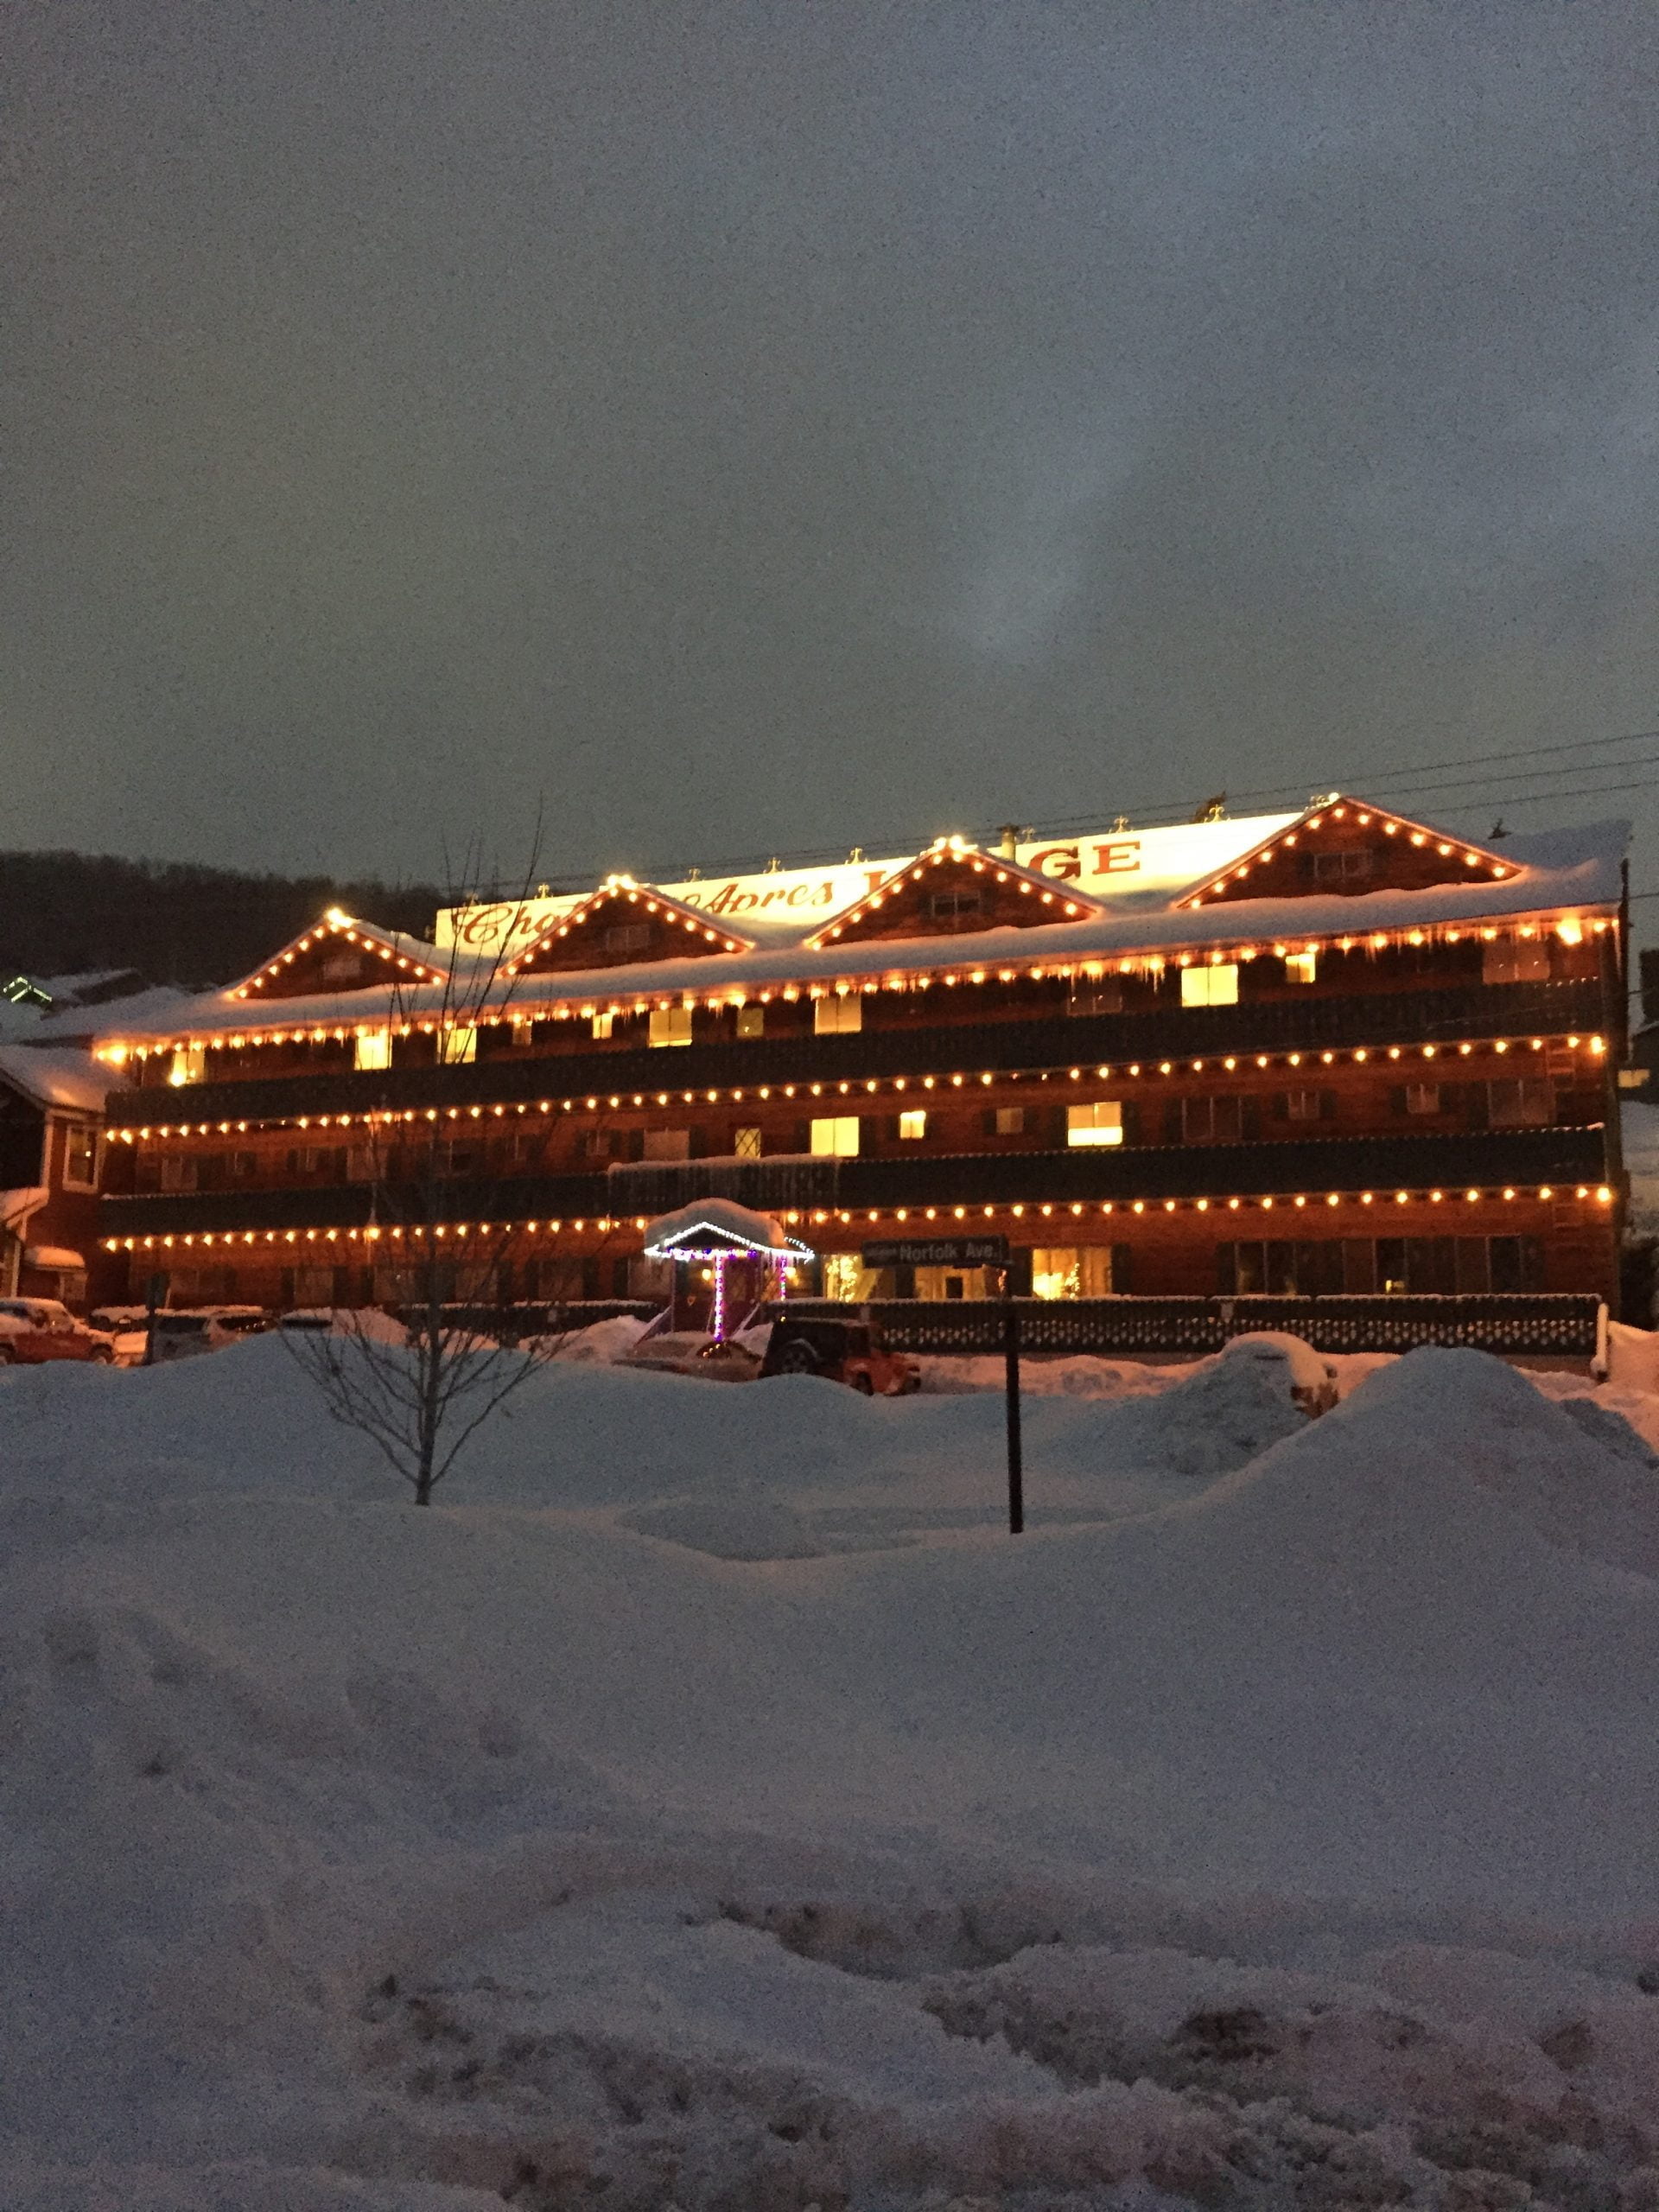 Lodge lit up for holidays